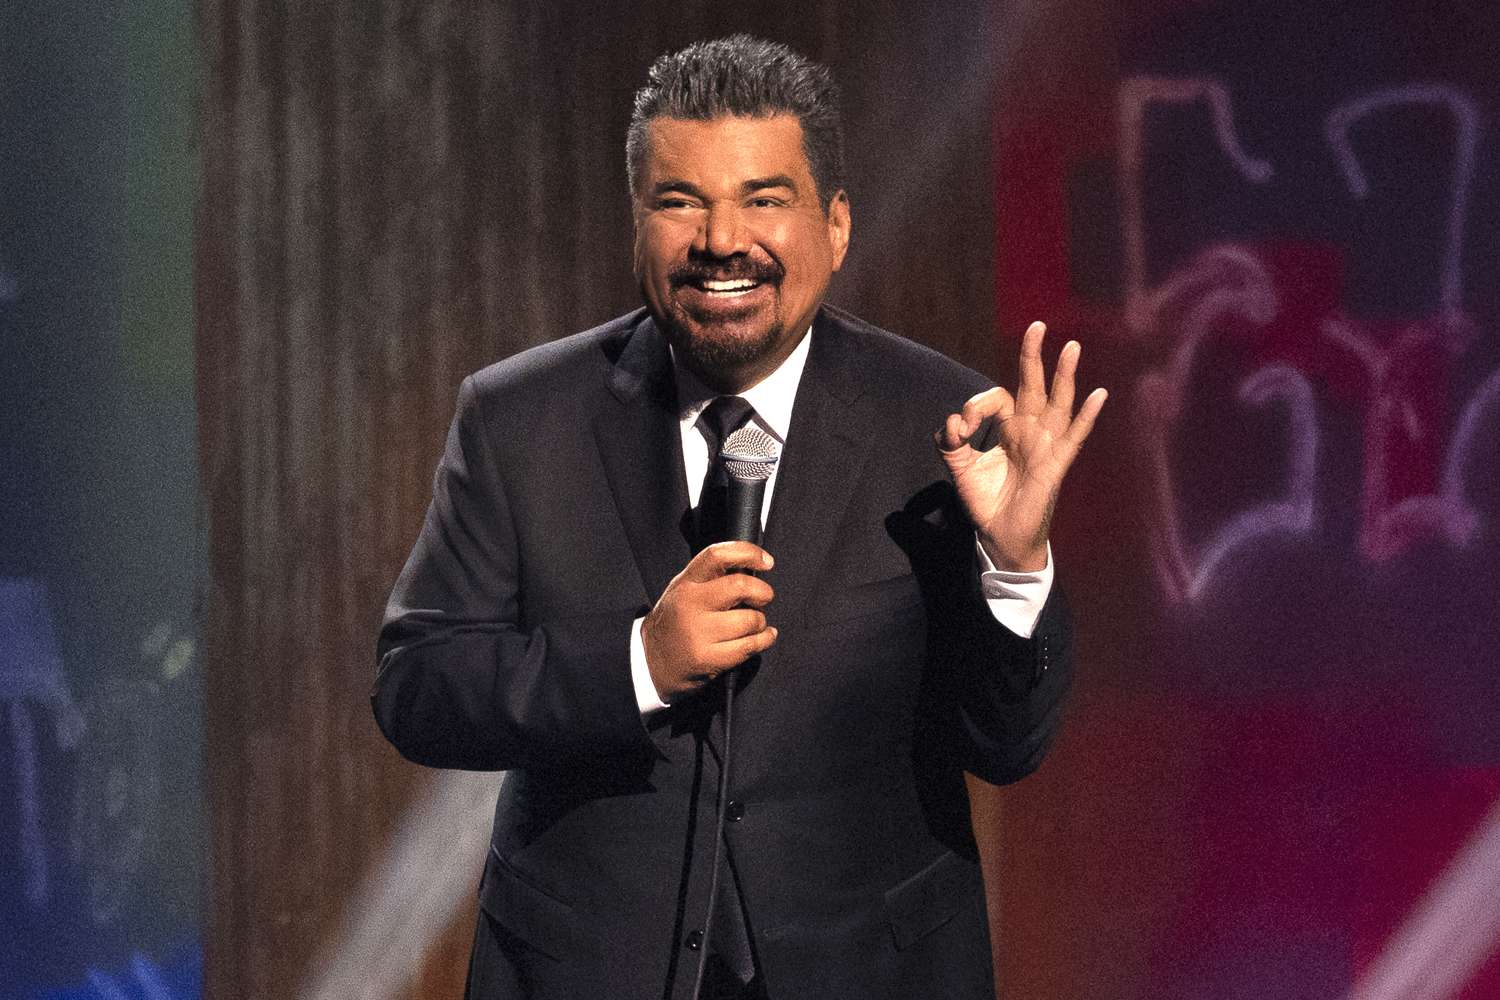 George Lopez Walks Off Stage at Eagle Mountain Casino Amid Tensions